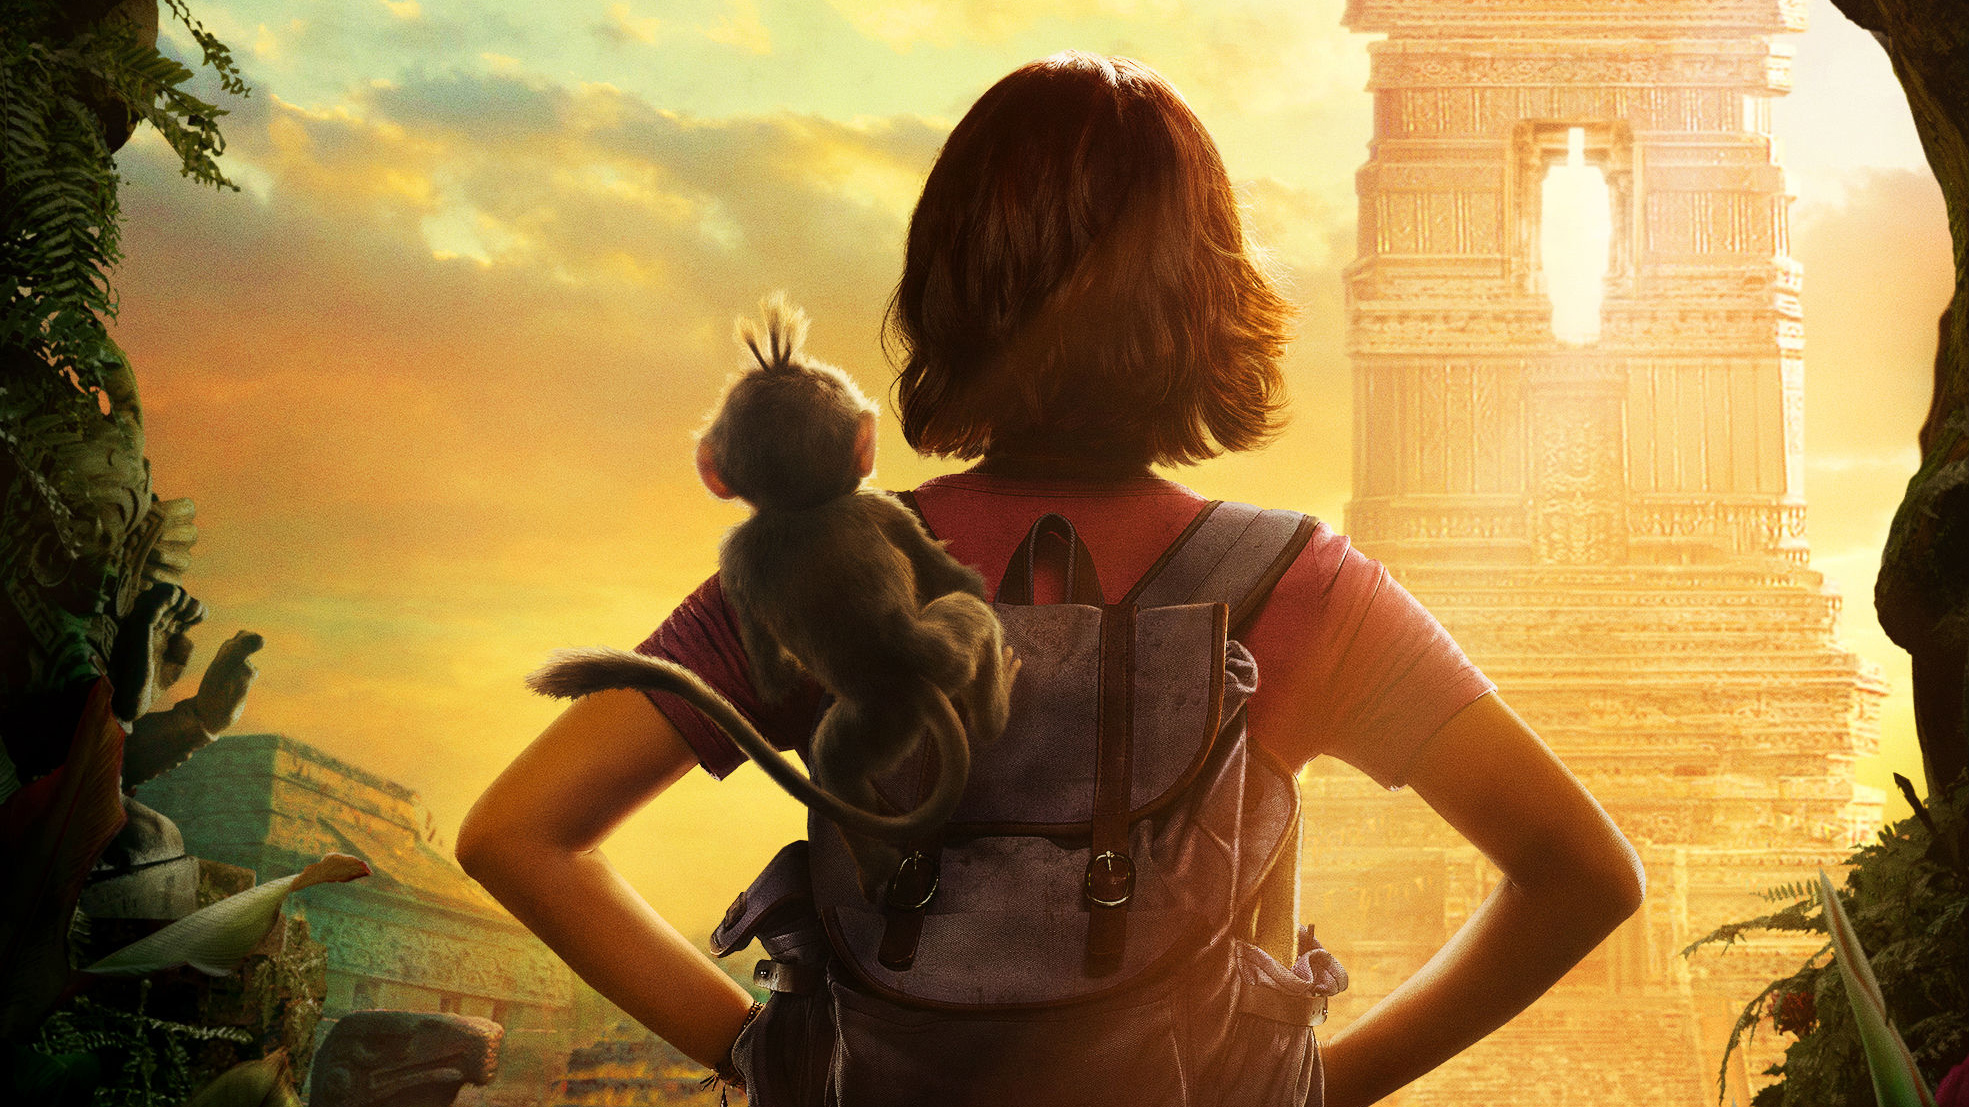 Dora And The Lost City Of Gold 2019 Poster, HD Movies, 4k Wallpaper